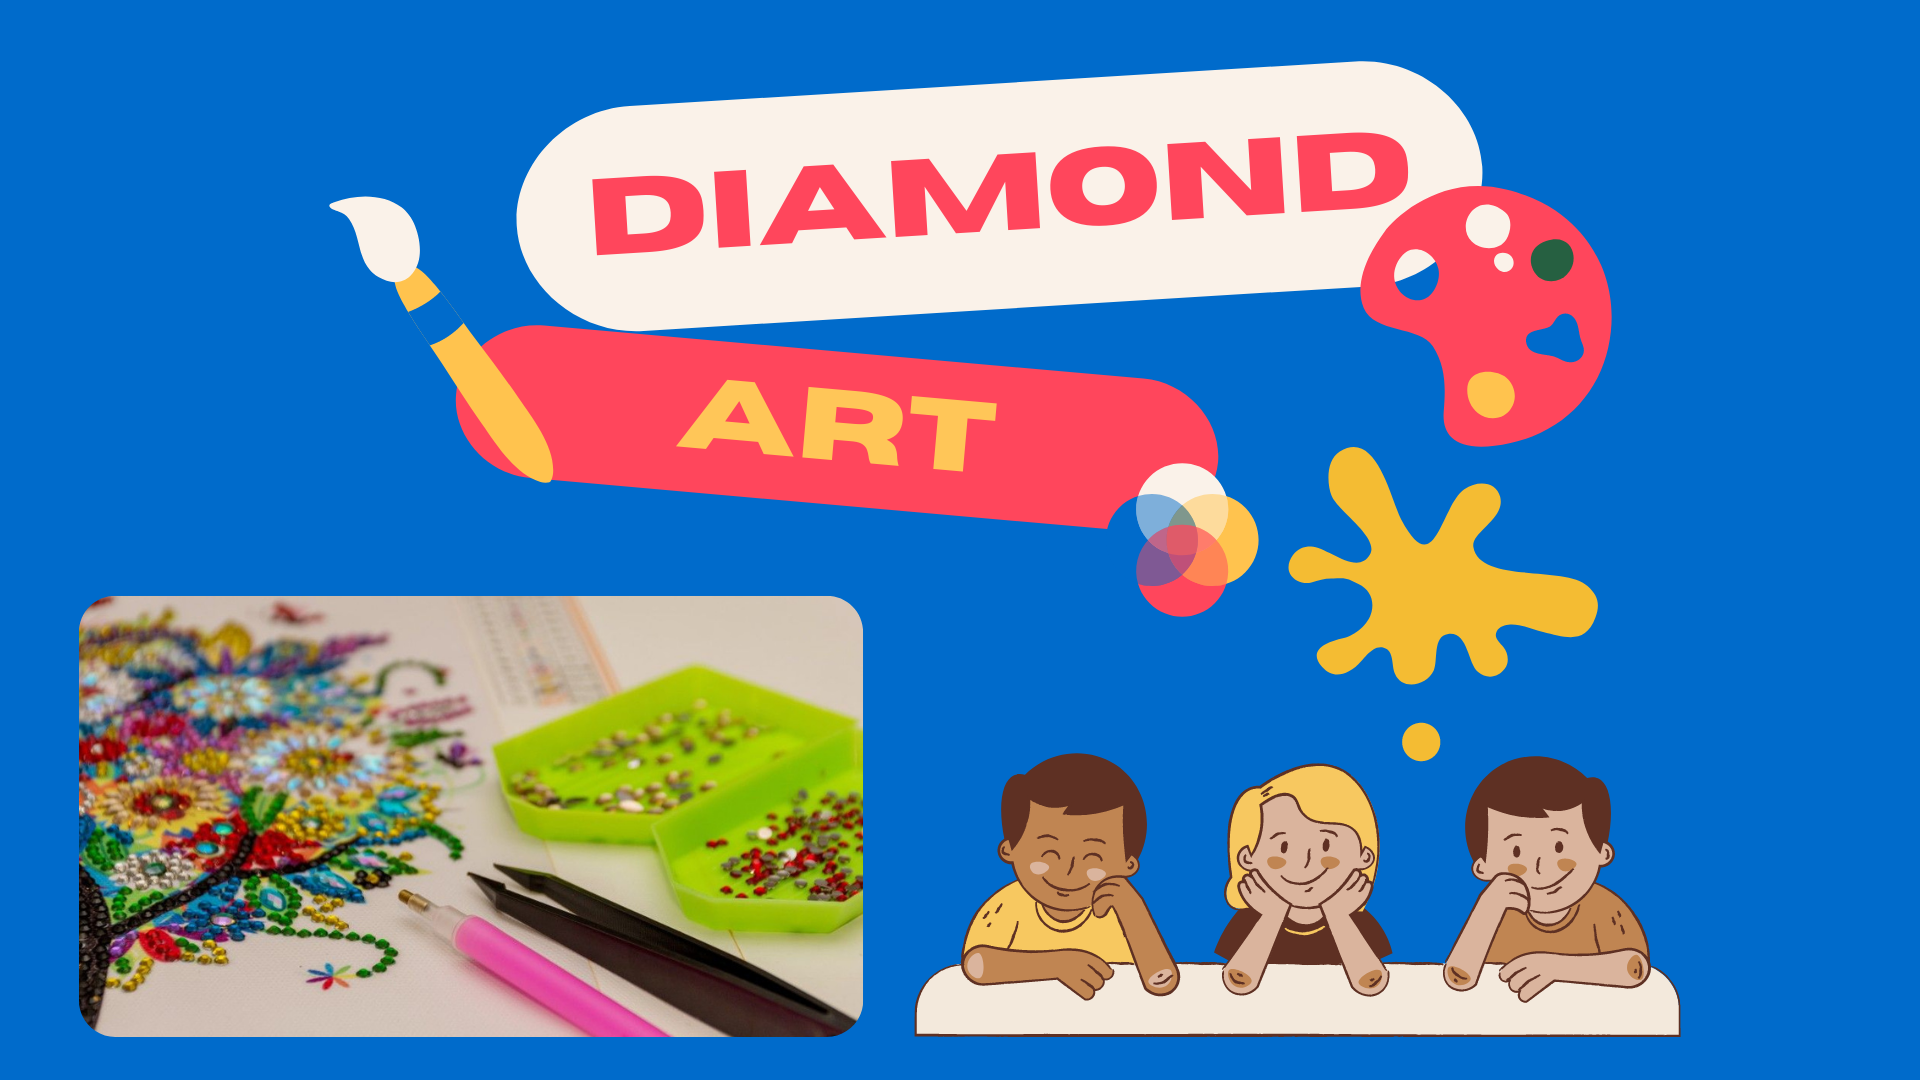 Everything You Need To Know About Diamond Art!